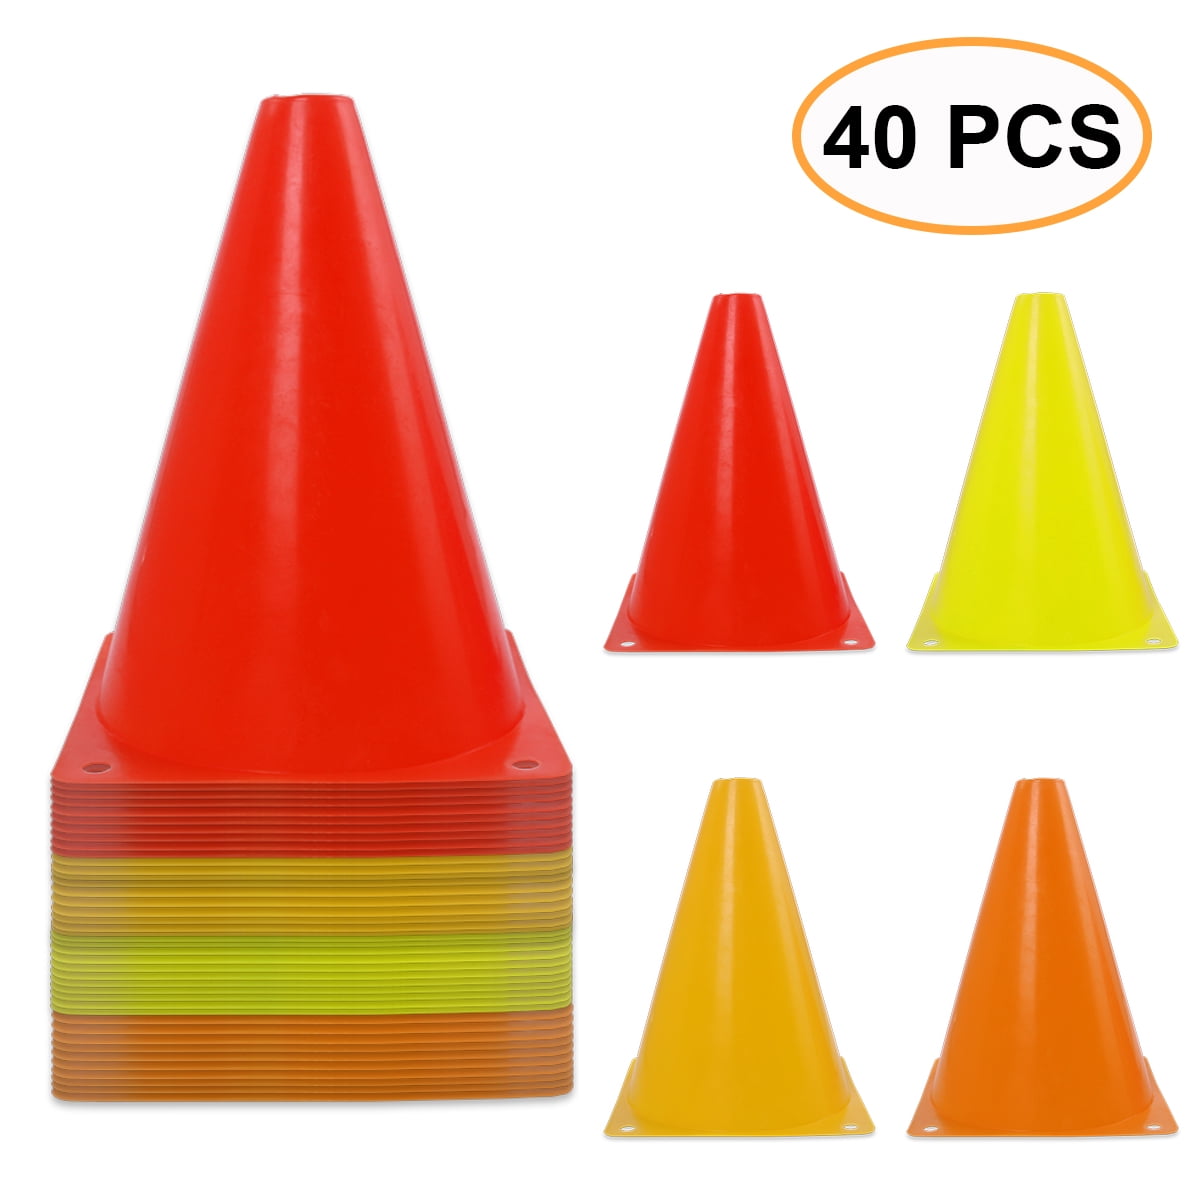 Details about    Sports Training Cones Plastic Traffic Cones Field Marker Cones for Skate, 